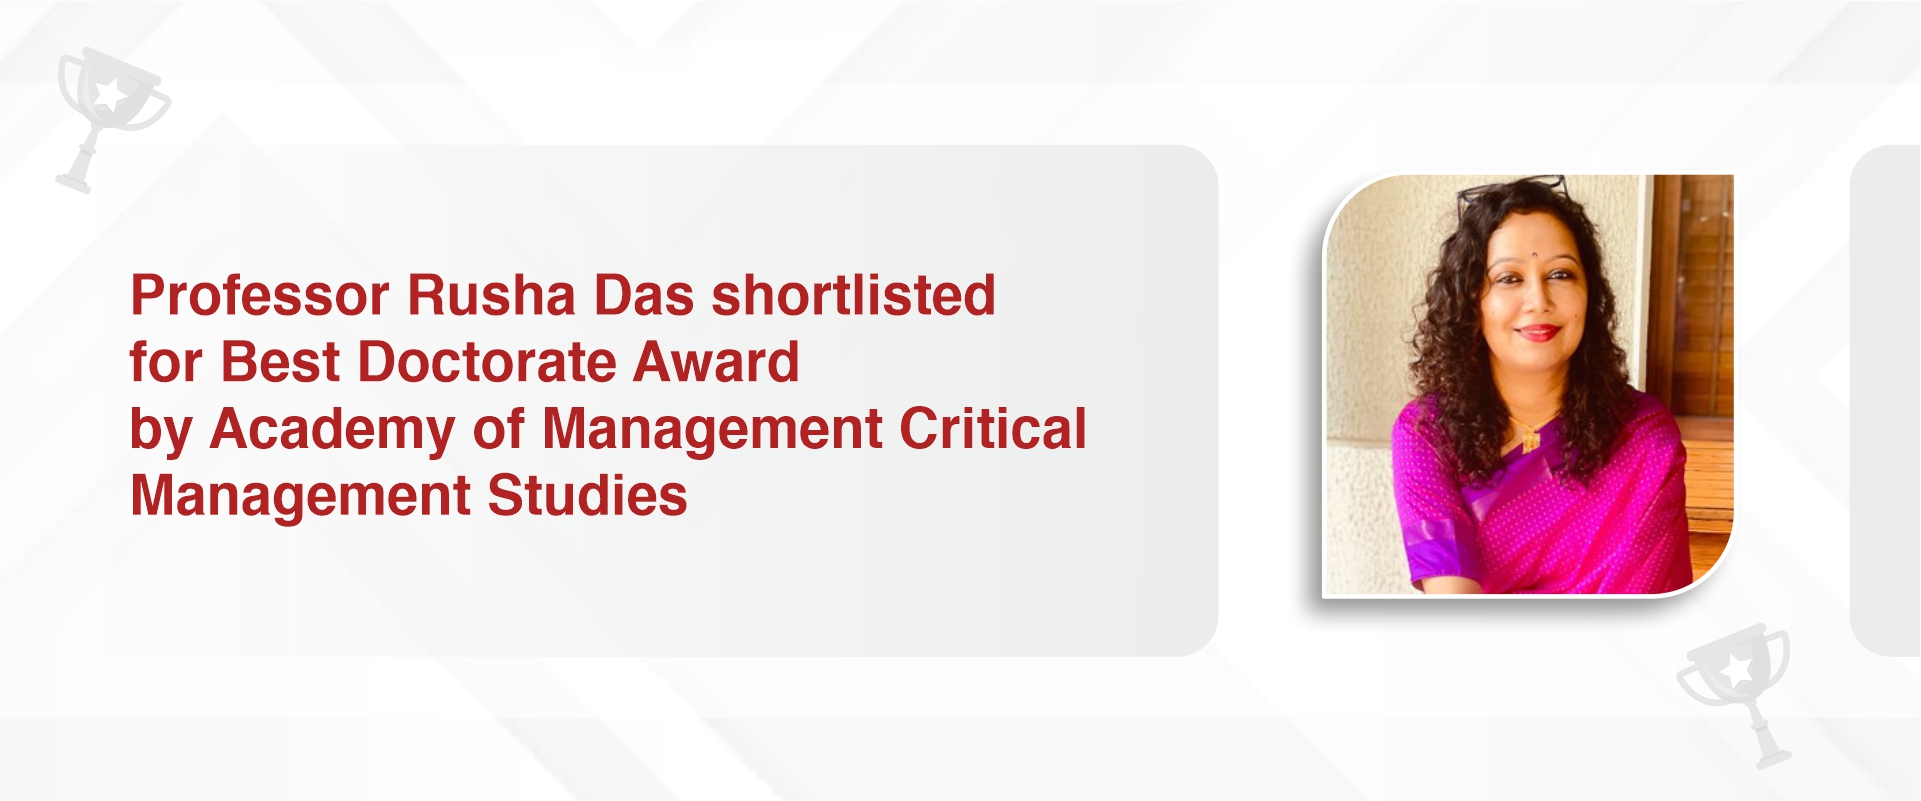 Professor Rusha Das shortlisted for Best Doctorate Award by Academy of Management, Critical Management Studies for Highly Commended category